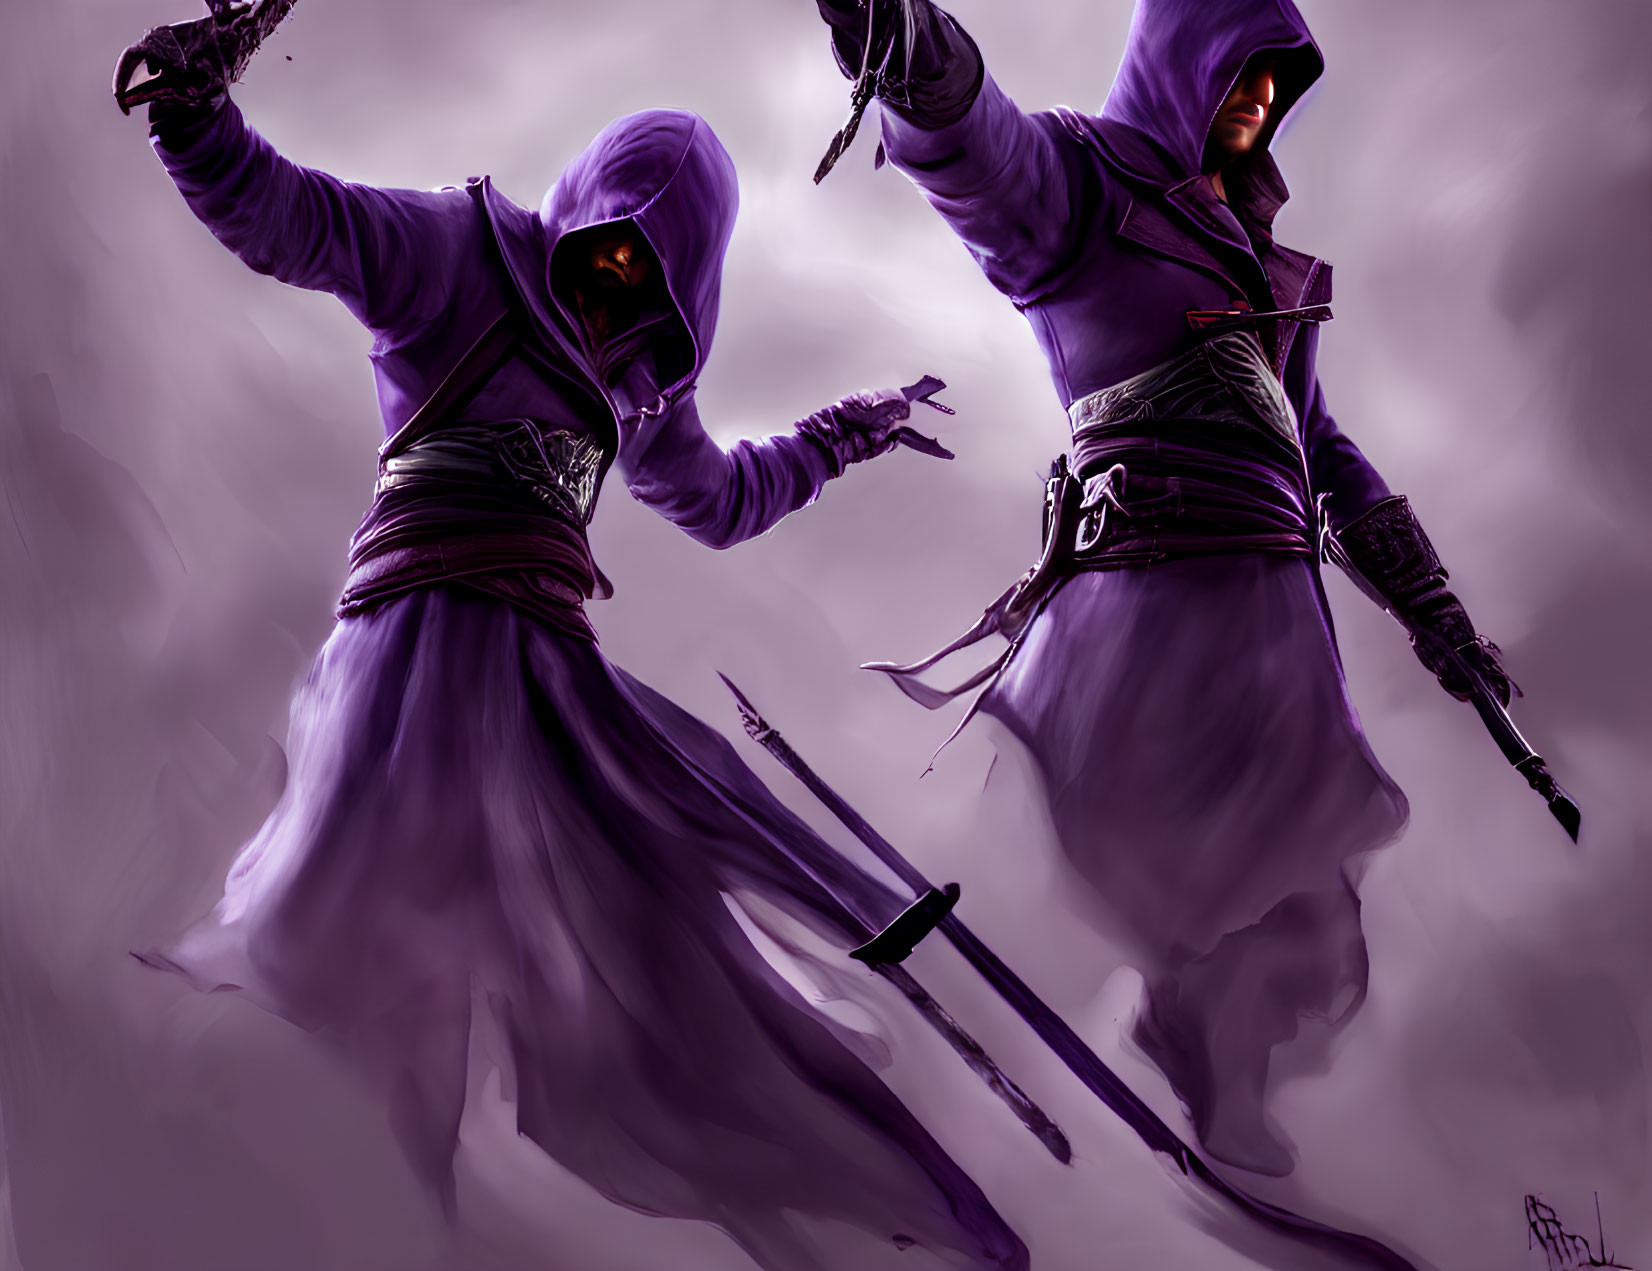 Cloaked figures with glowing eyes in misty backdrop with dagger and commanding hand.